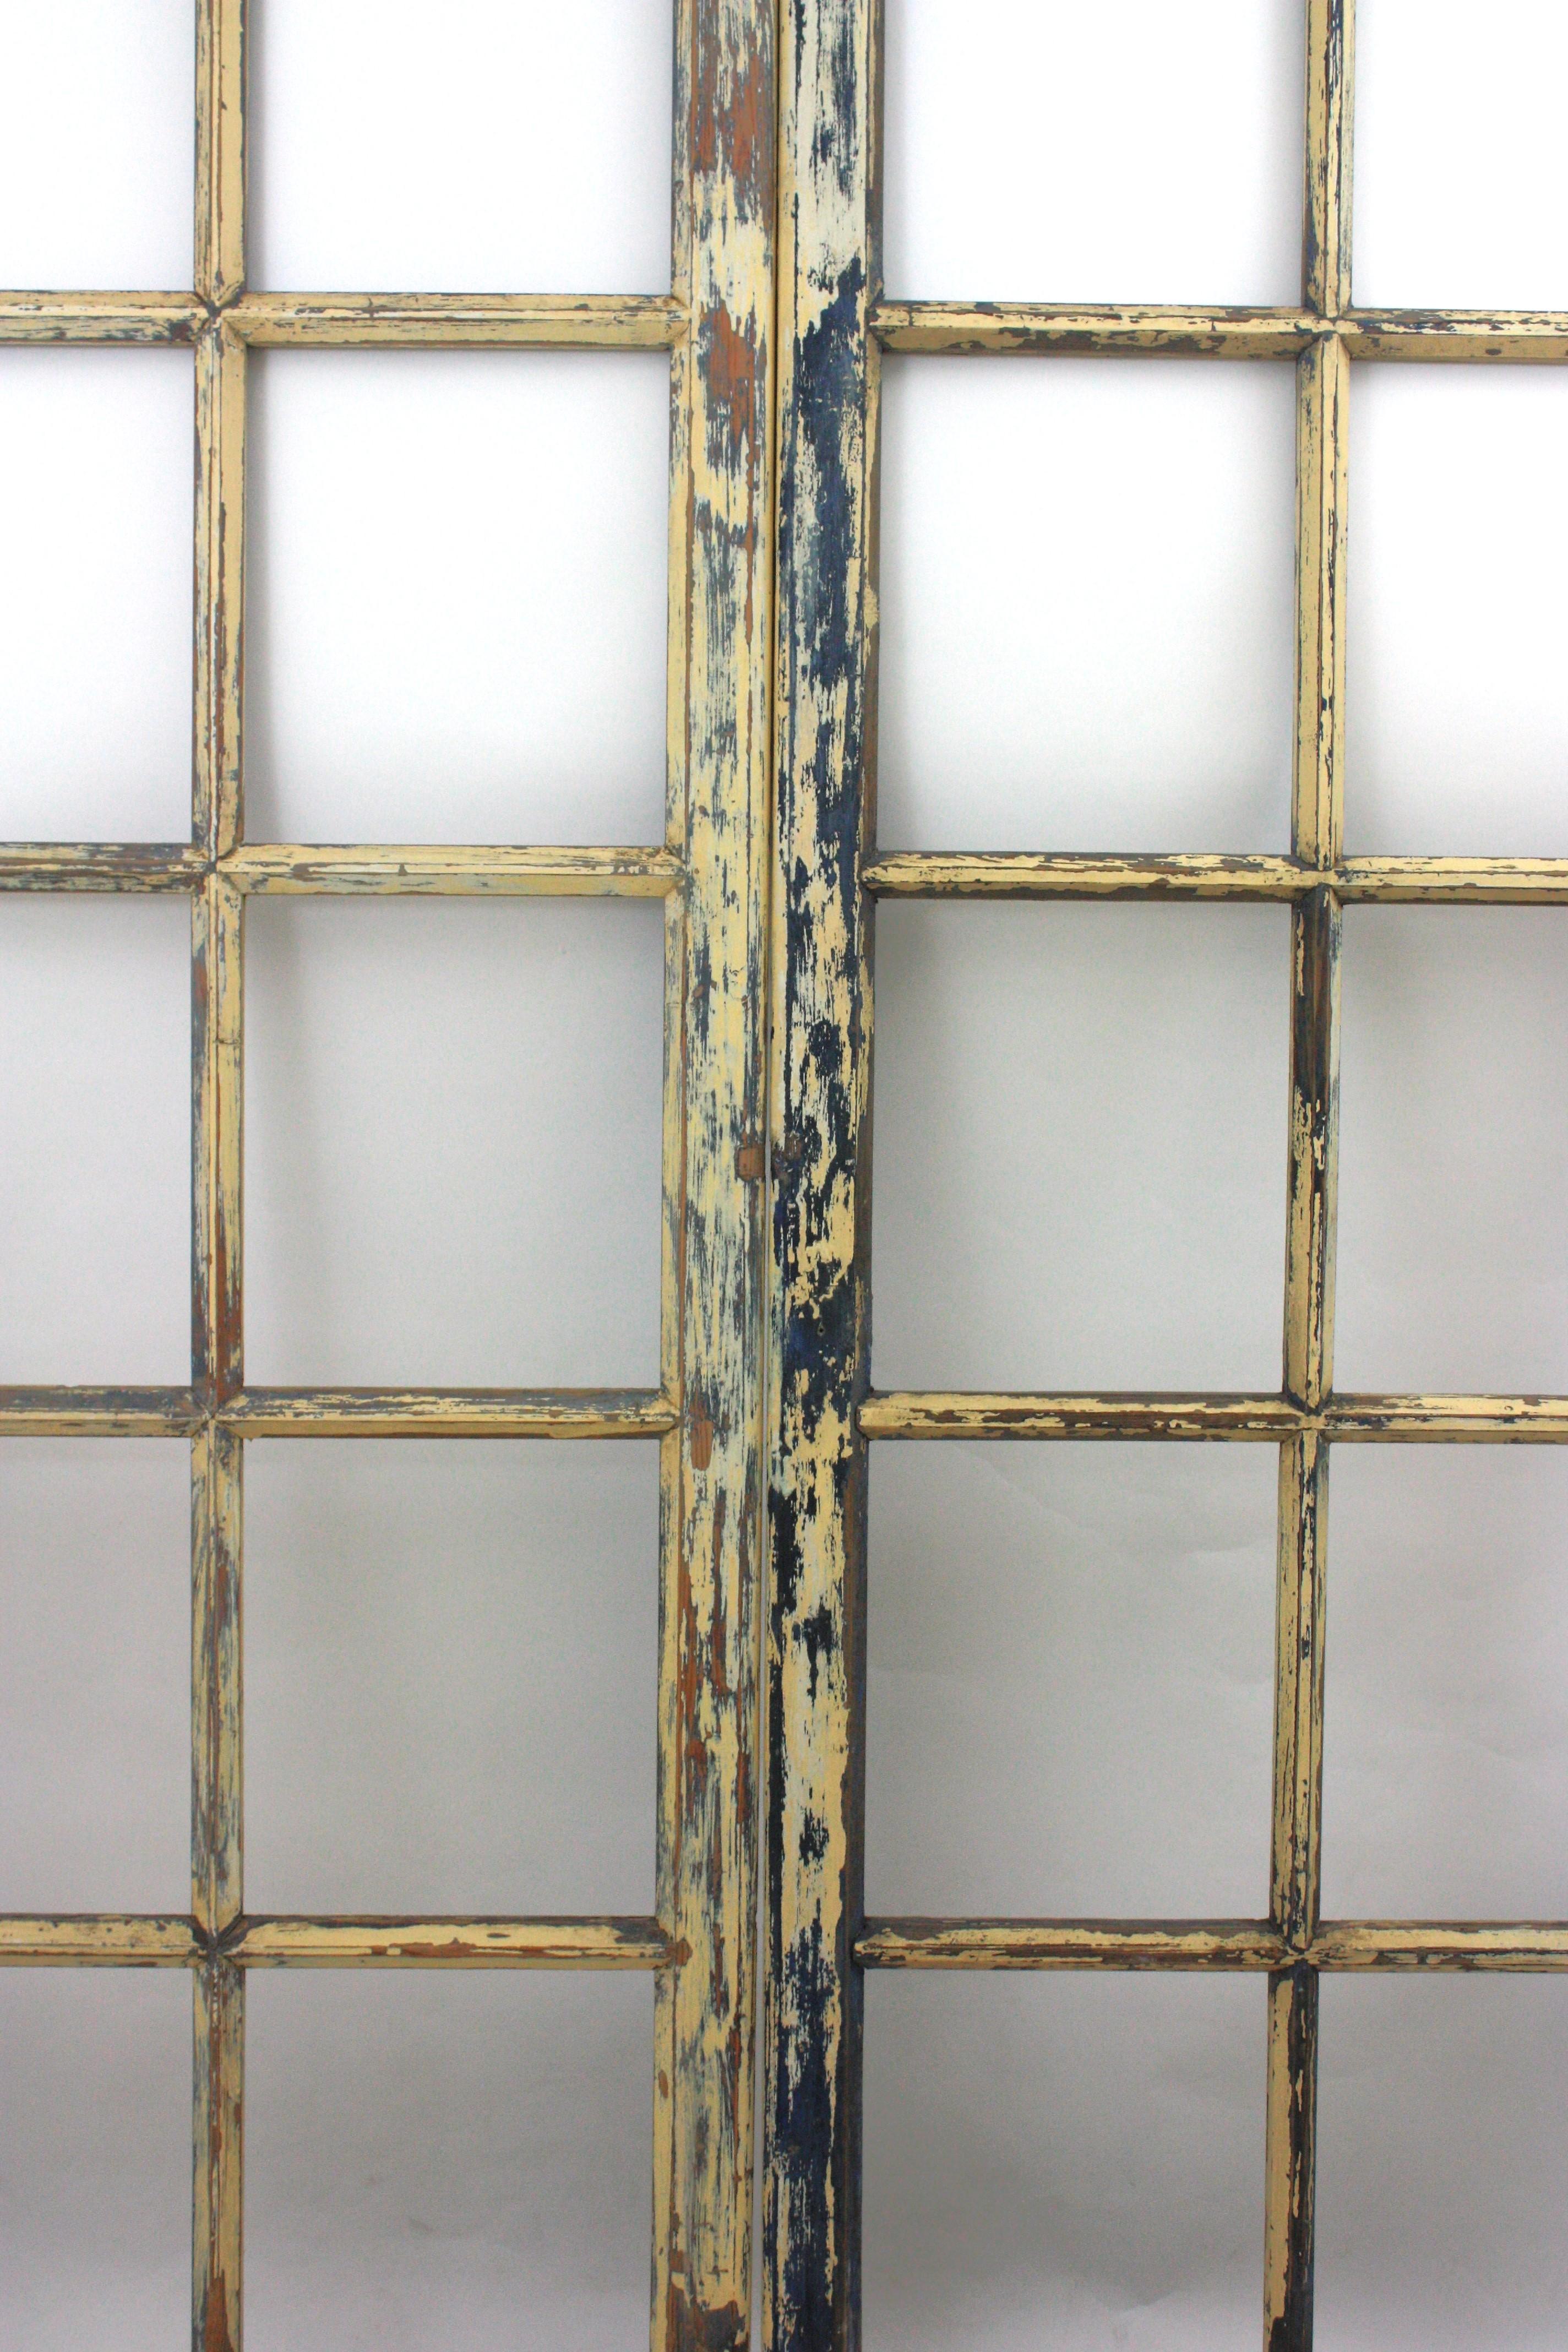 Spanish Pair of Industrial Paneled Wooden Doors or Windows For Sale